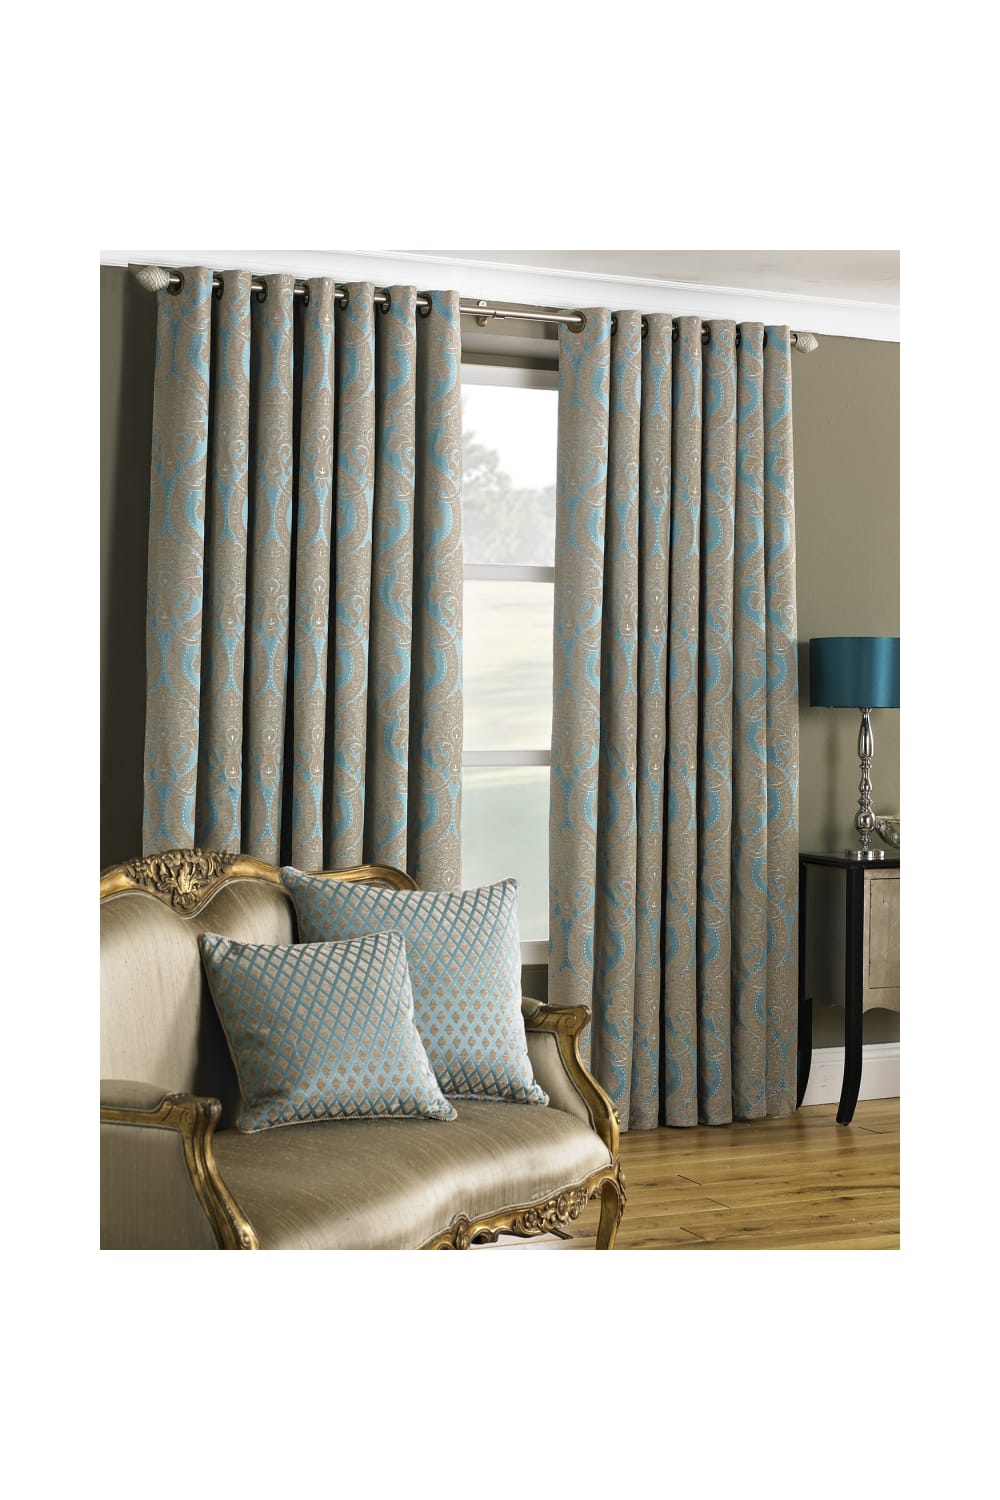 Riva Home Renaissance Ringtop Curtains (Turquoise) (66 x 90 inch)